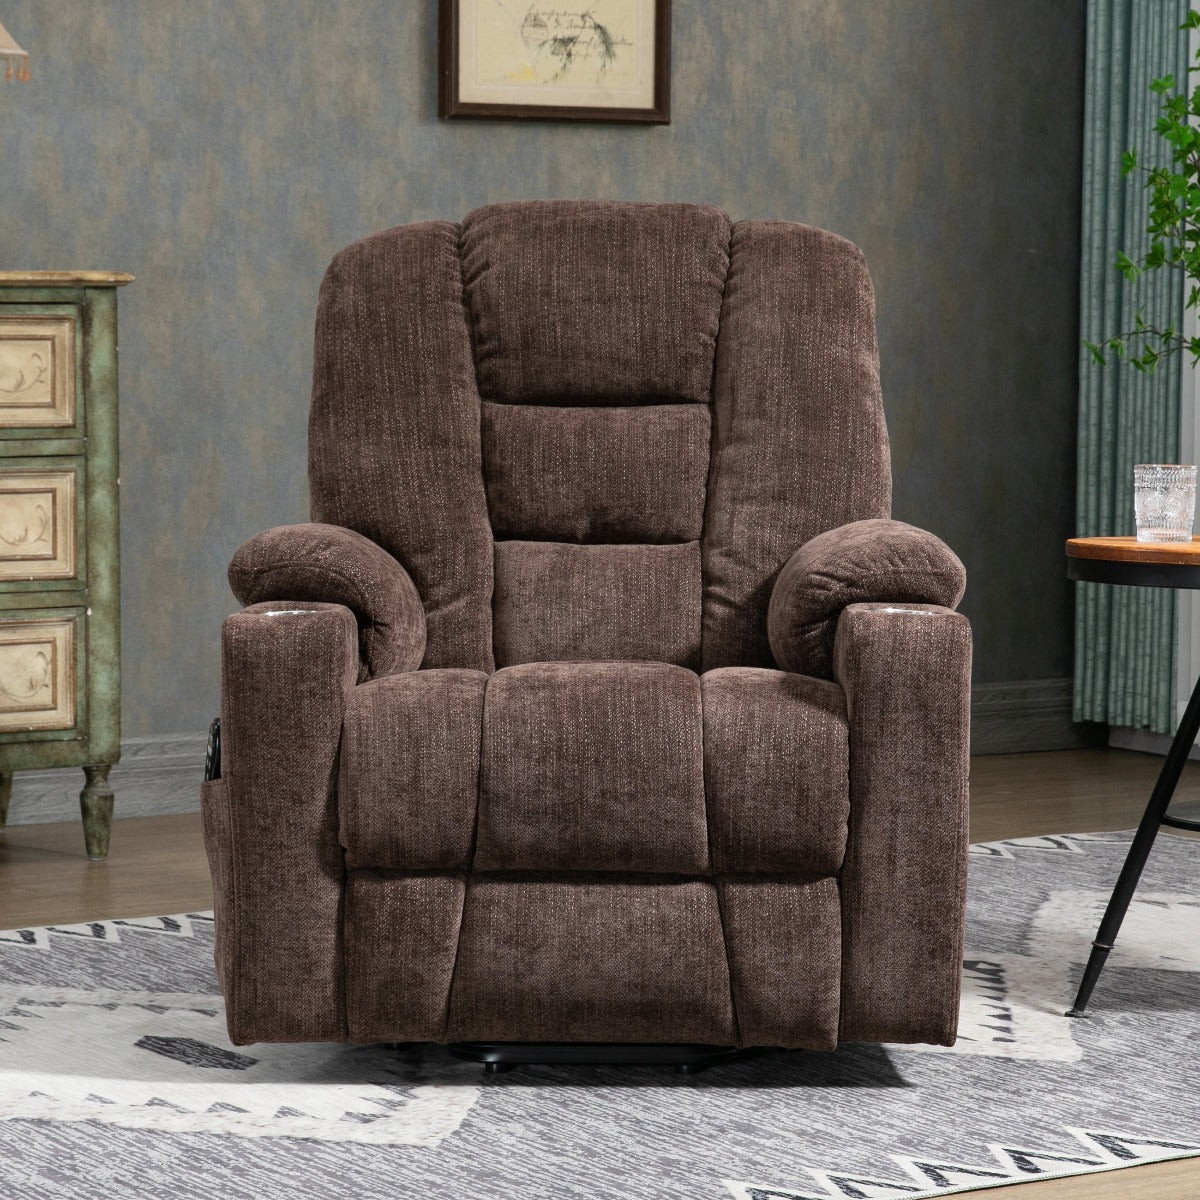 EMON'S Large and Wide Power Lift Recliner Chair with Massage and Heat, Brown